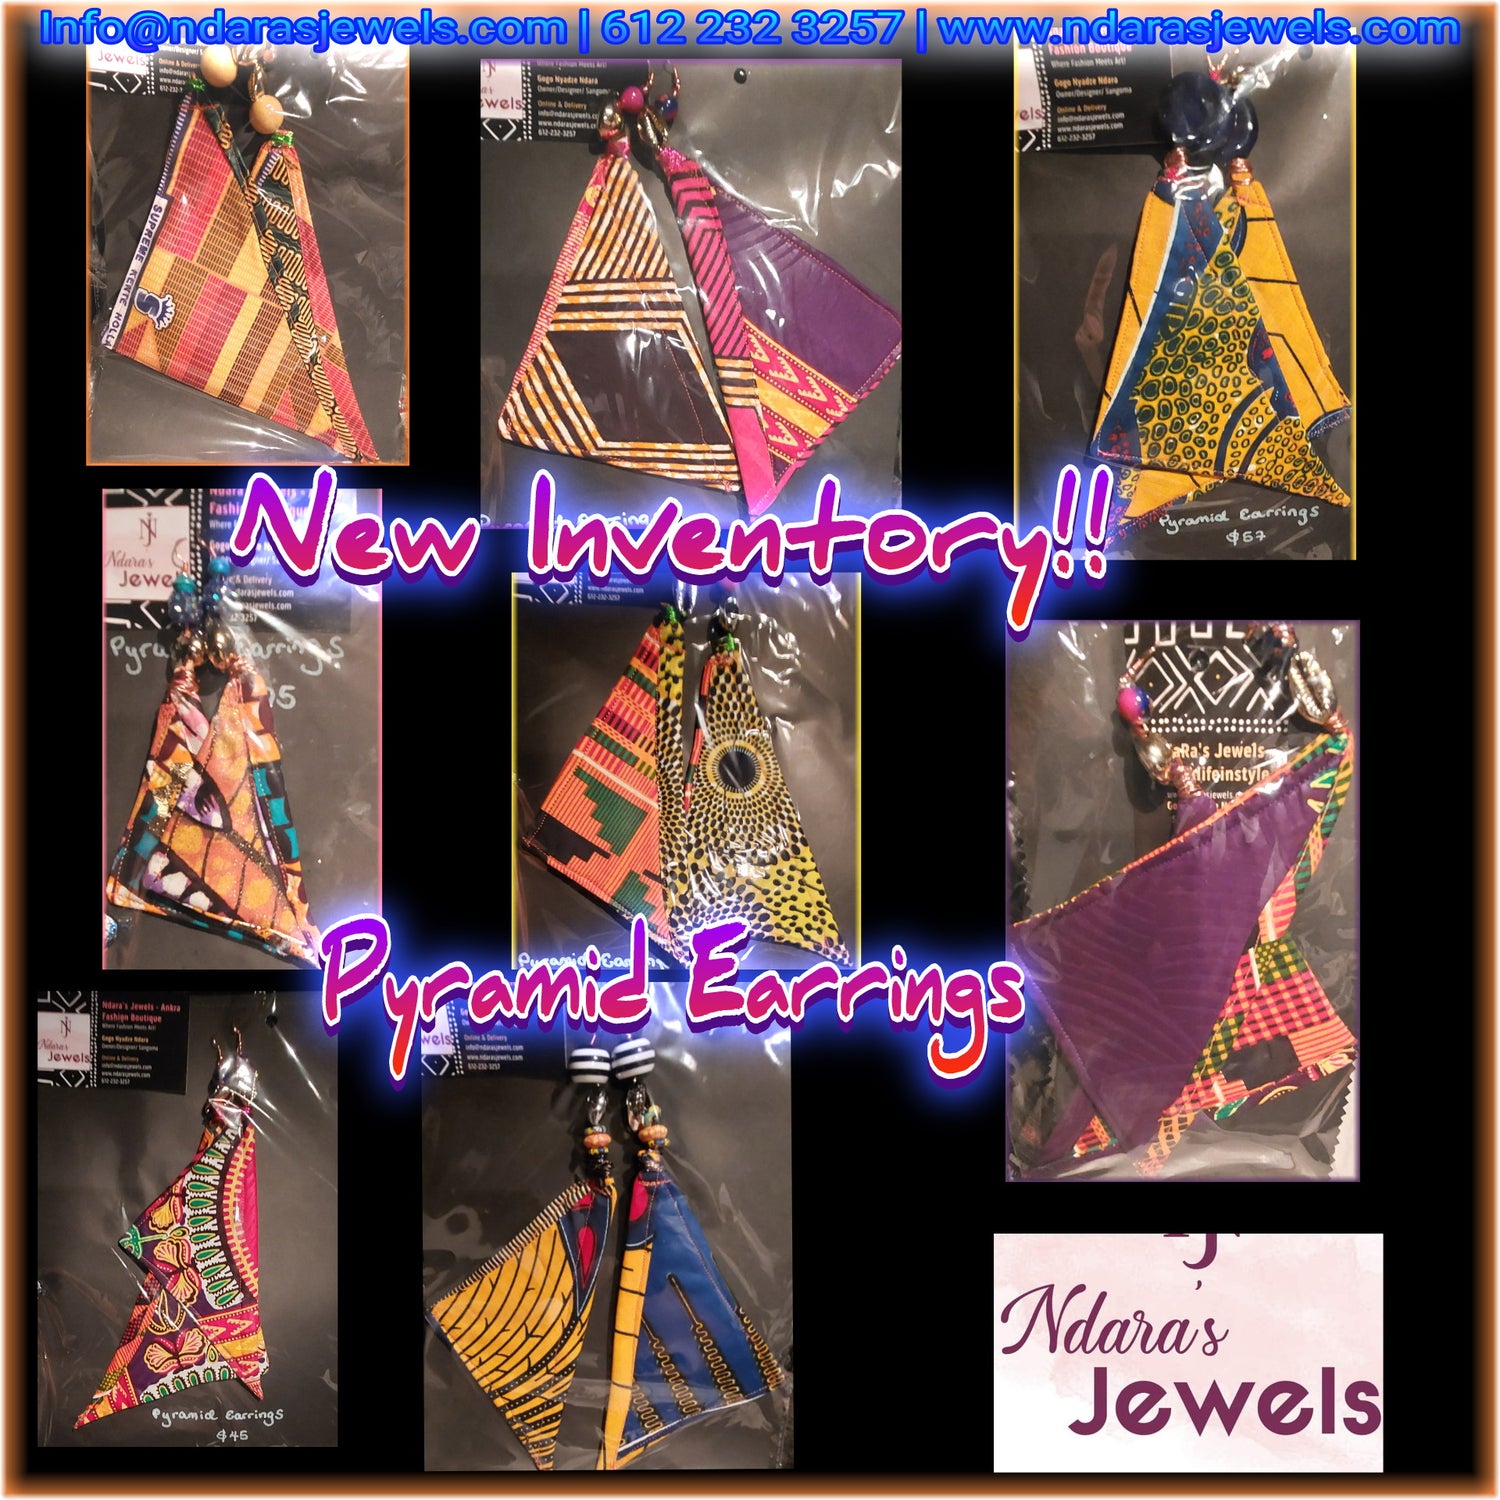 Pyramid Earrings Collection